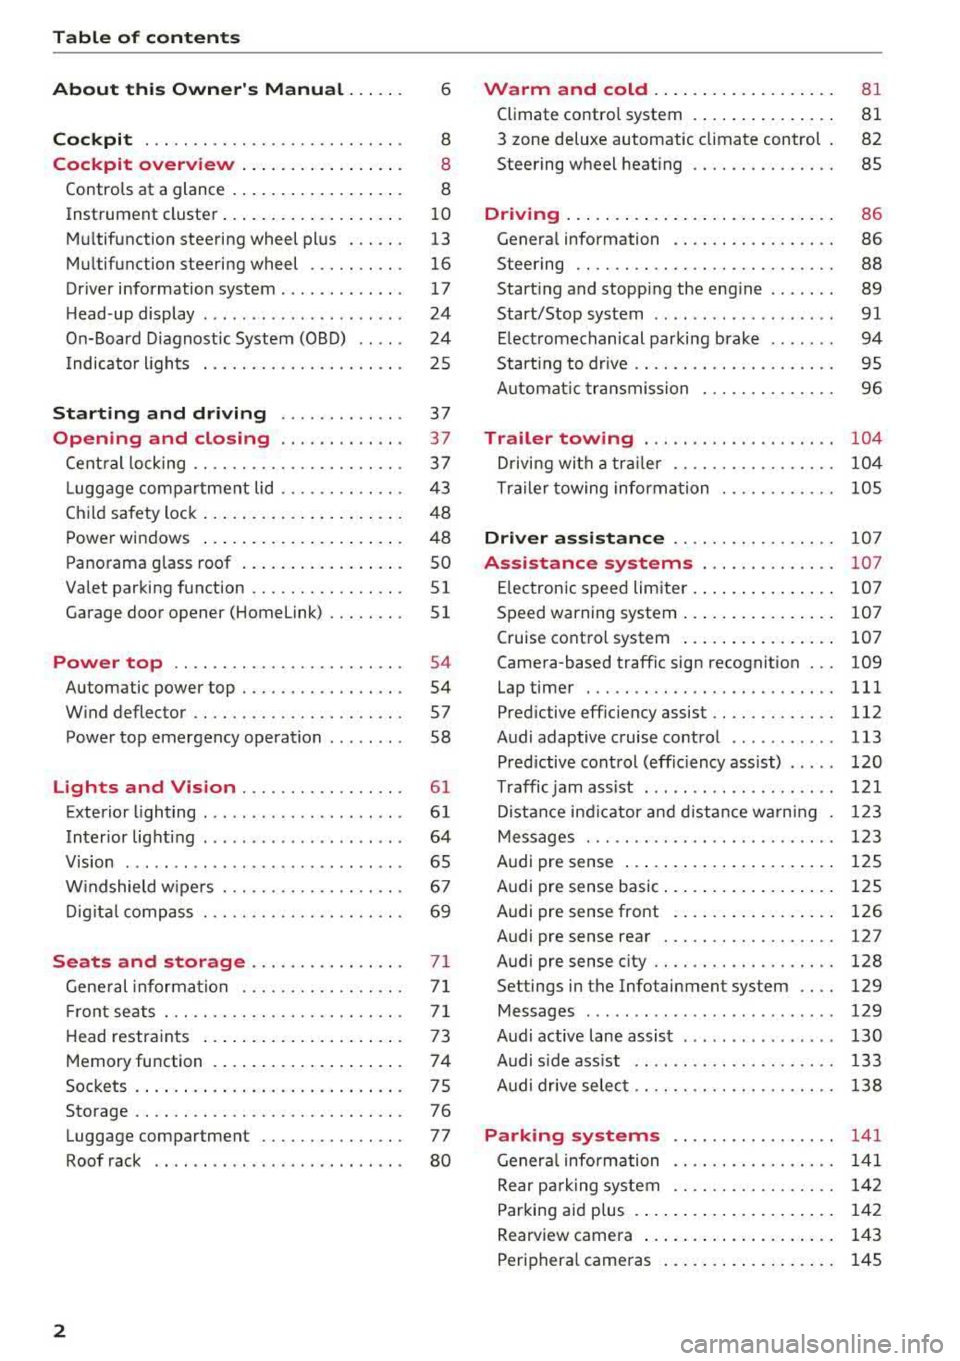 AUDI A5 COUPE 2018  Owners Manual Table of  content s 
About  this  Owne rs  Manual.  . .  . . . 
6 
Cockpi t . . .  . .  . . . .  . . .  . . . . .  . . .  . . . .  . .  . 8 
Cockpit  overview  . . . . . . .  . . .  . . .  . . . . 8 